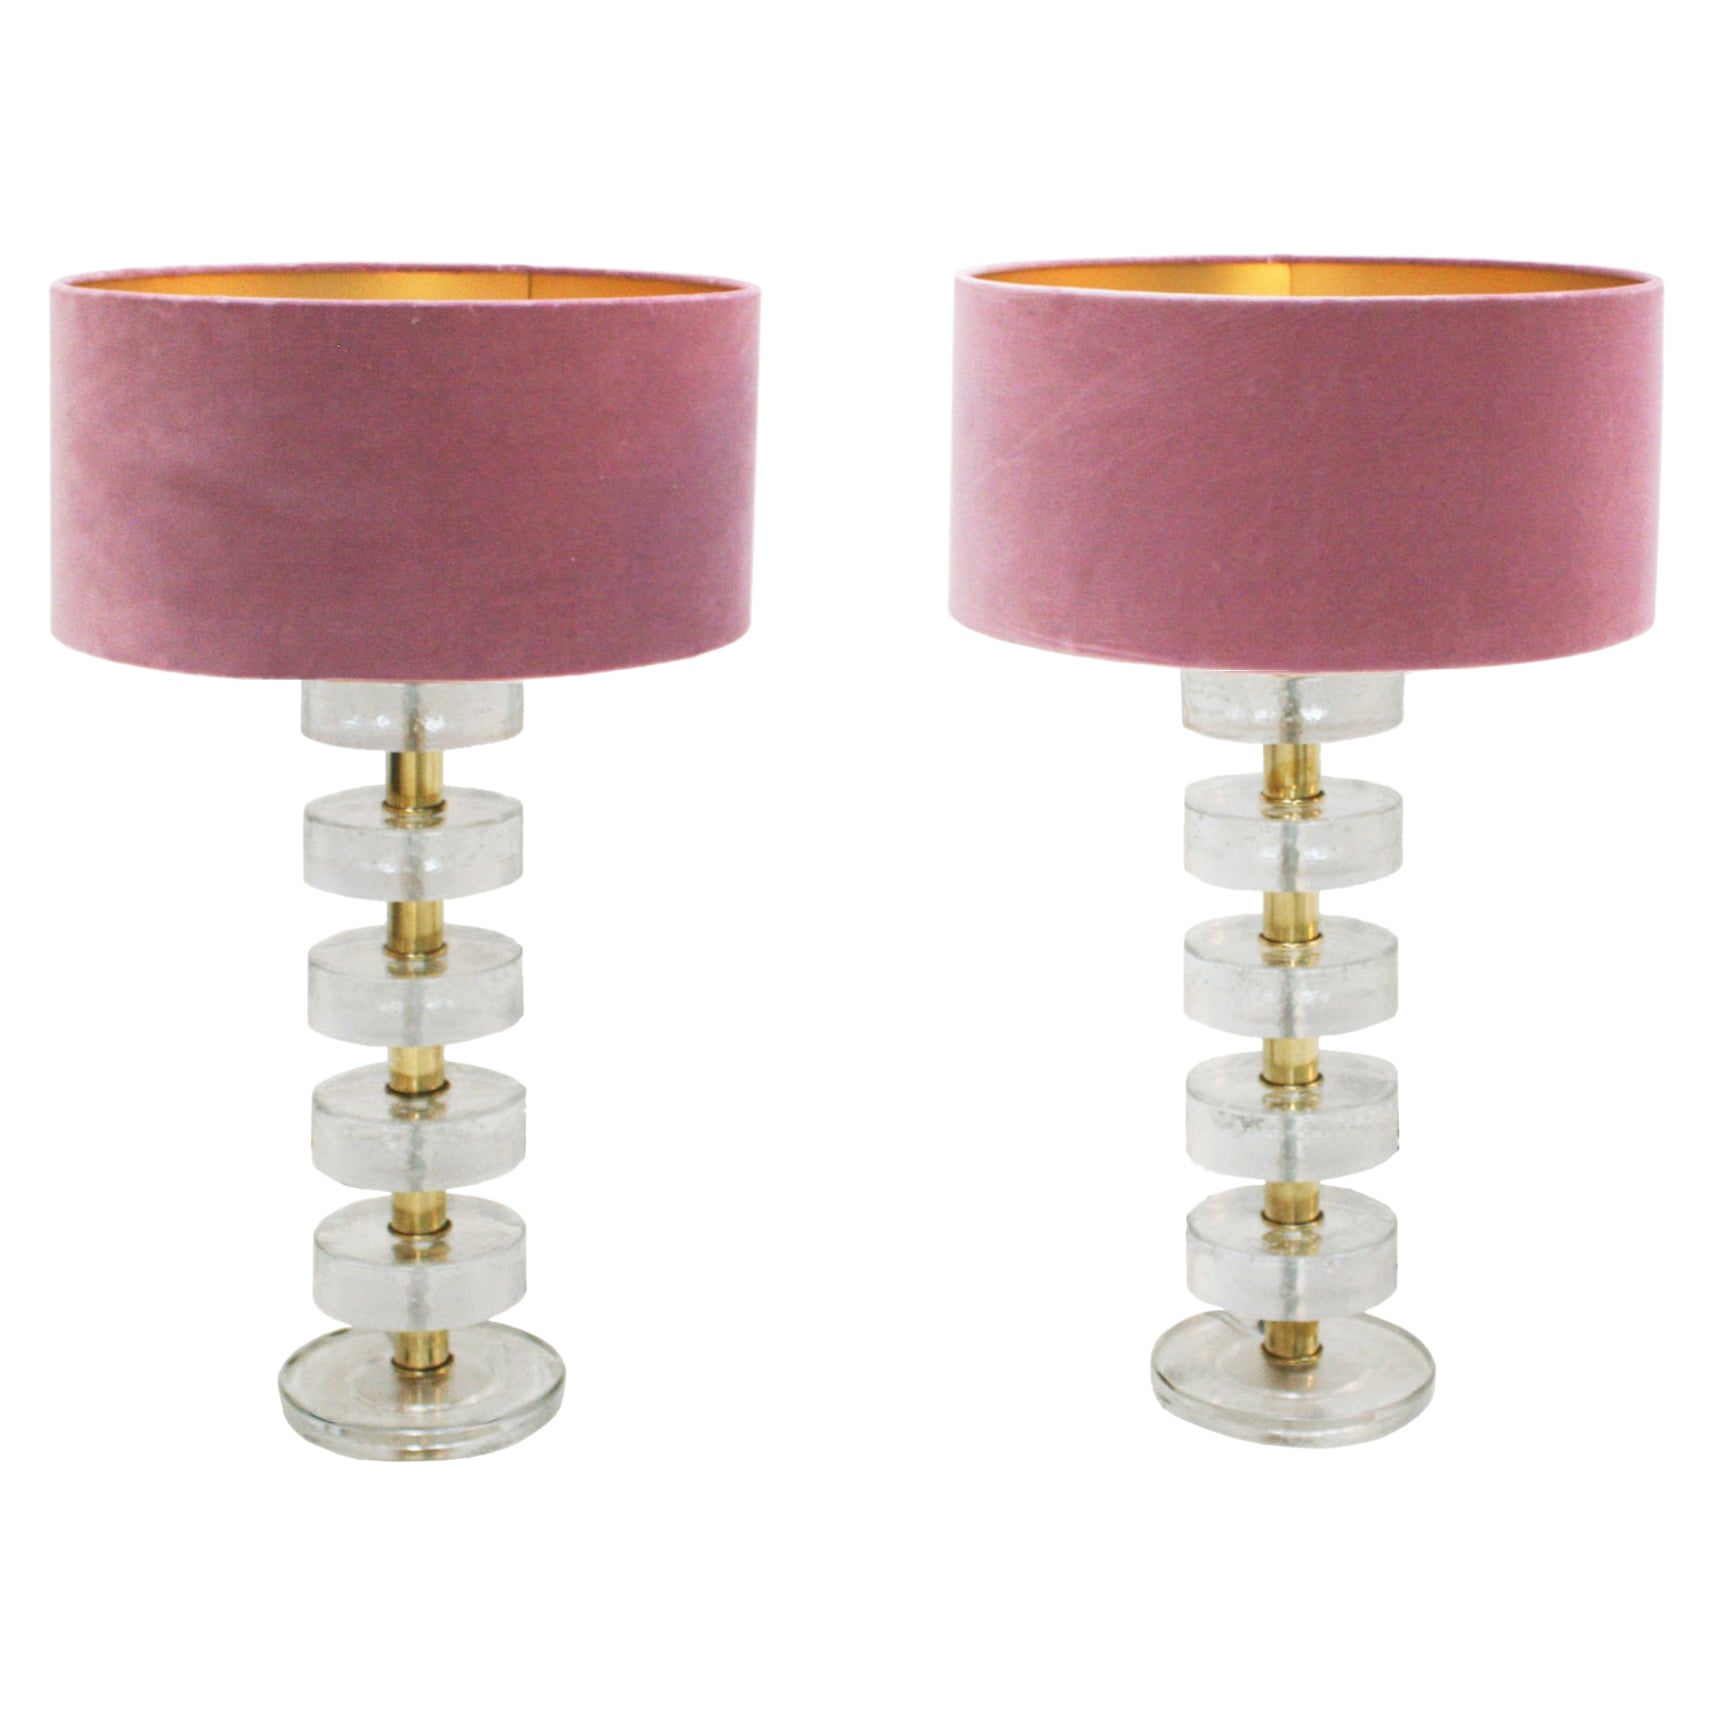 Mid-Century Modern Style Pair of Sculptural Murano Glass Italian Table Lamps